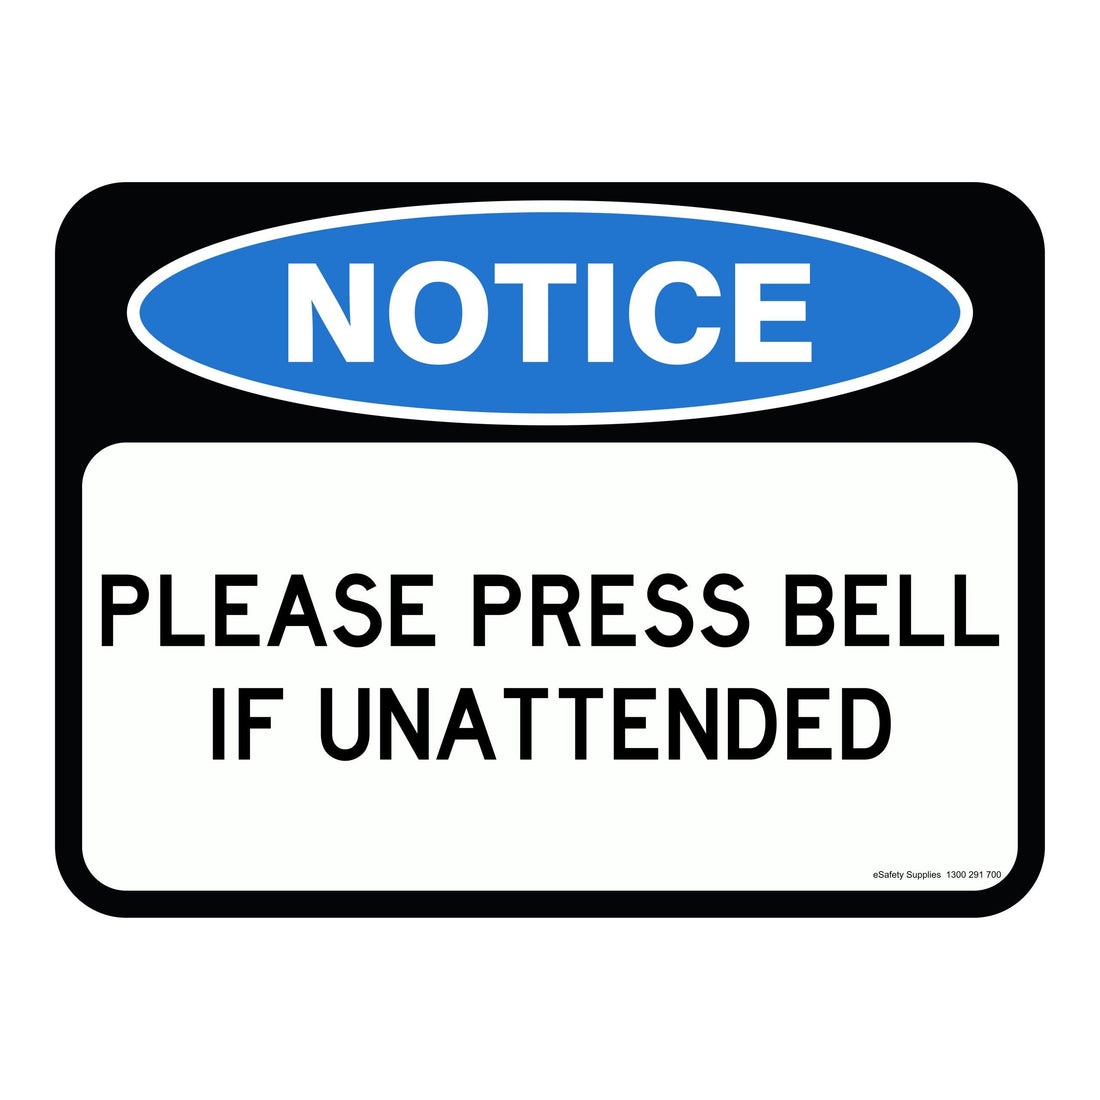 NOTICE - PLEASE PRESS BELL IF UNATTENDED